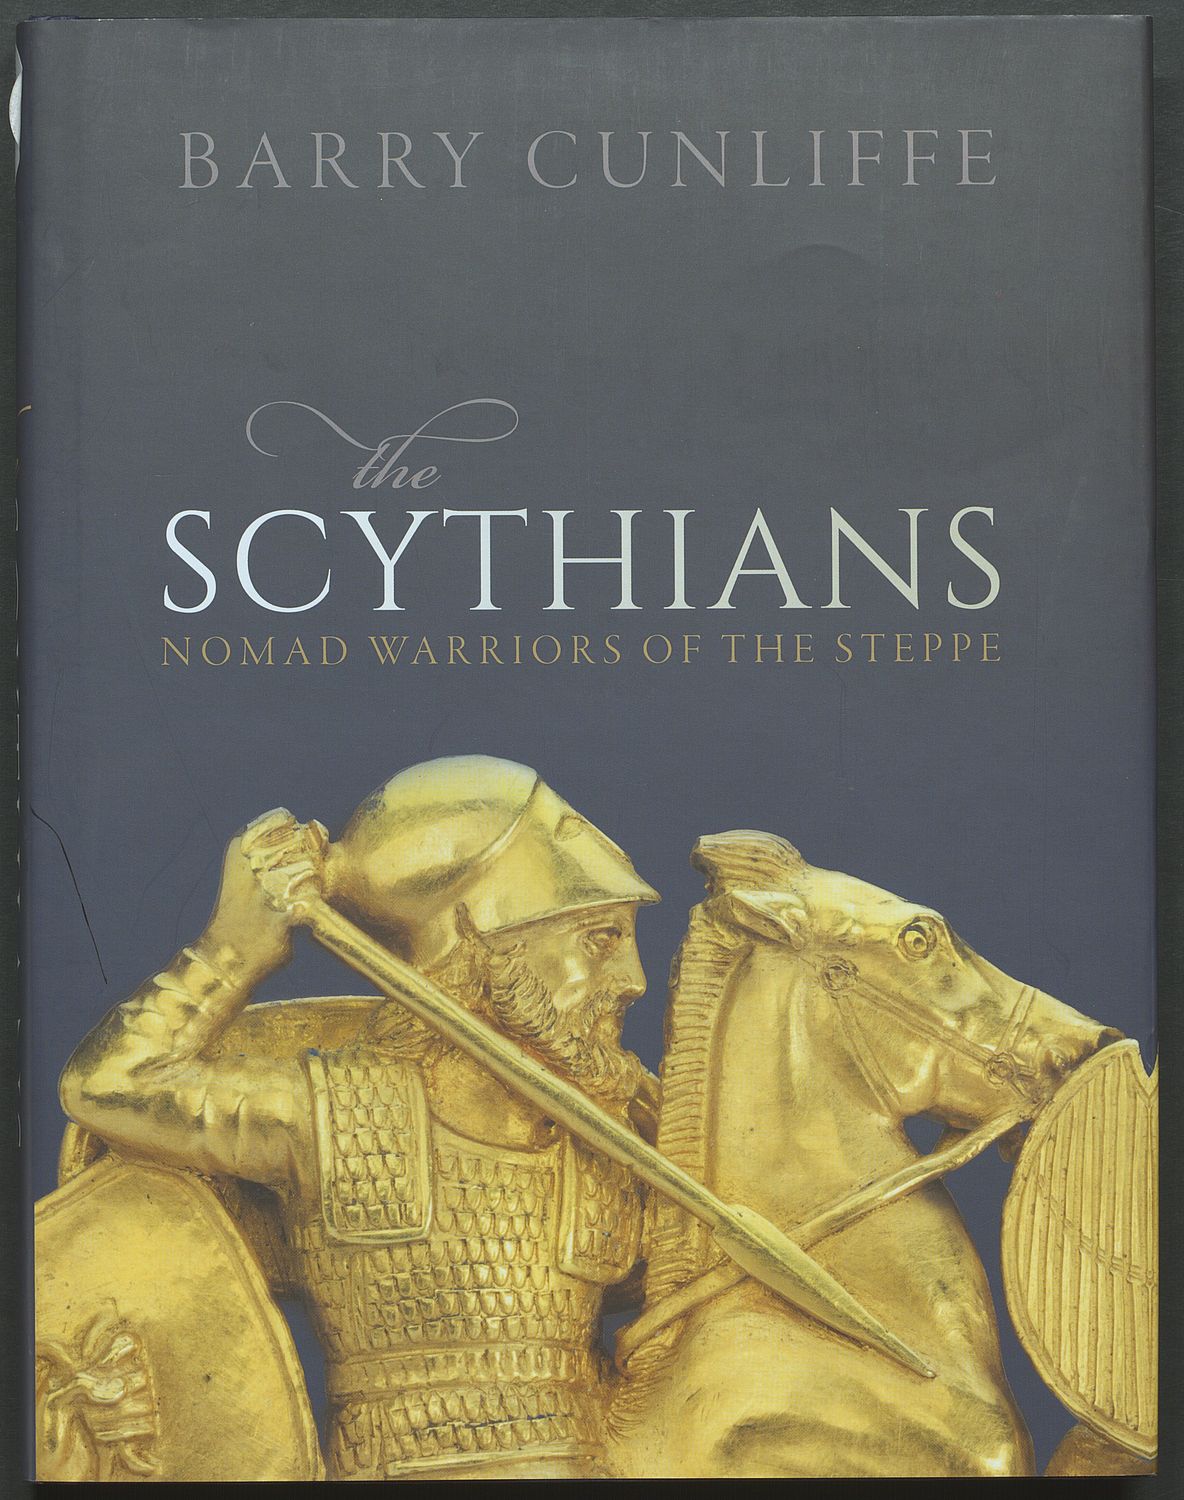 The Scythians : nomad warriors of the steppe